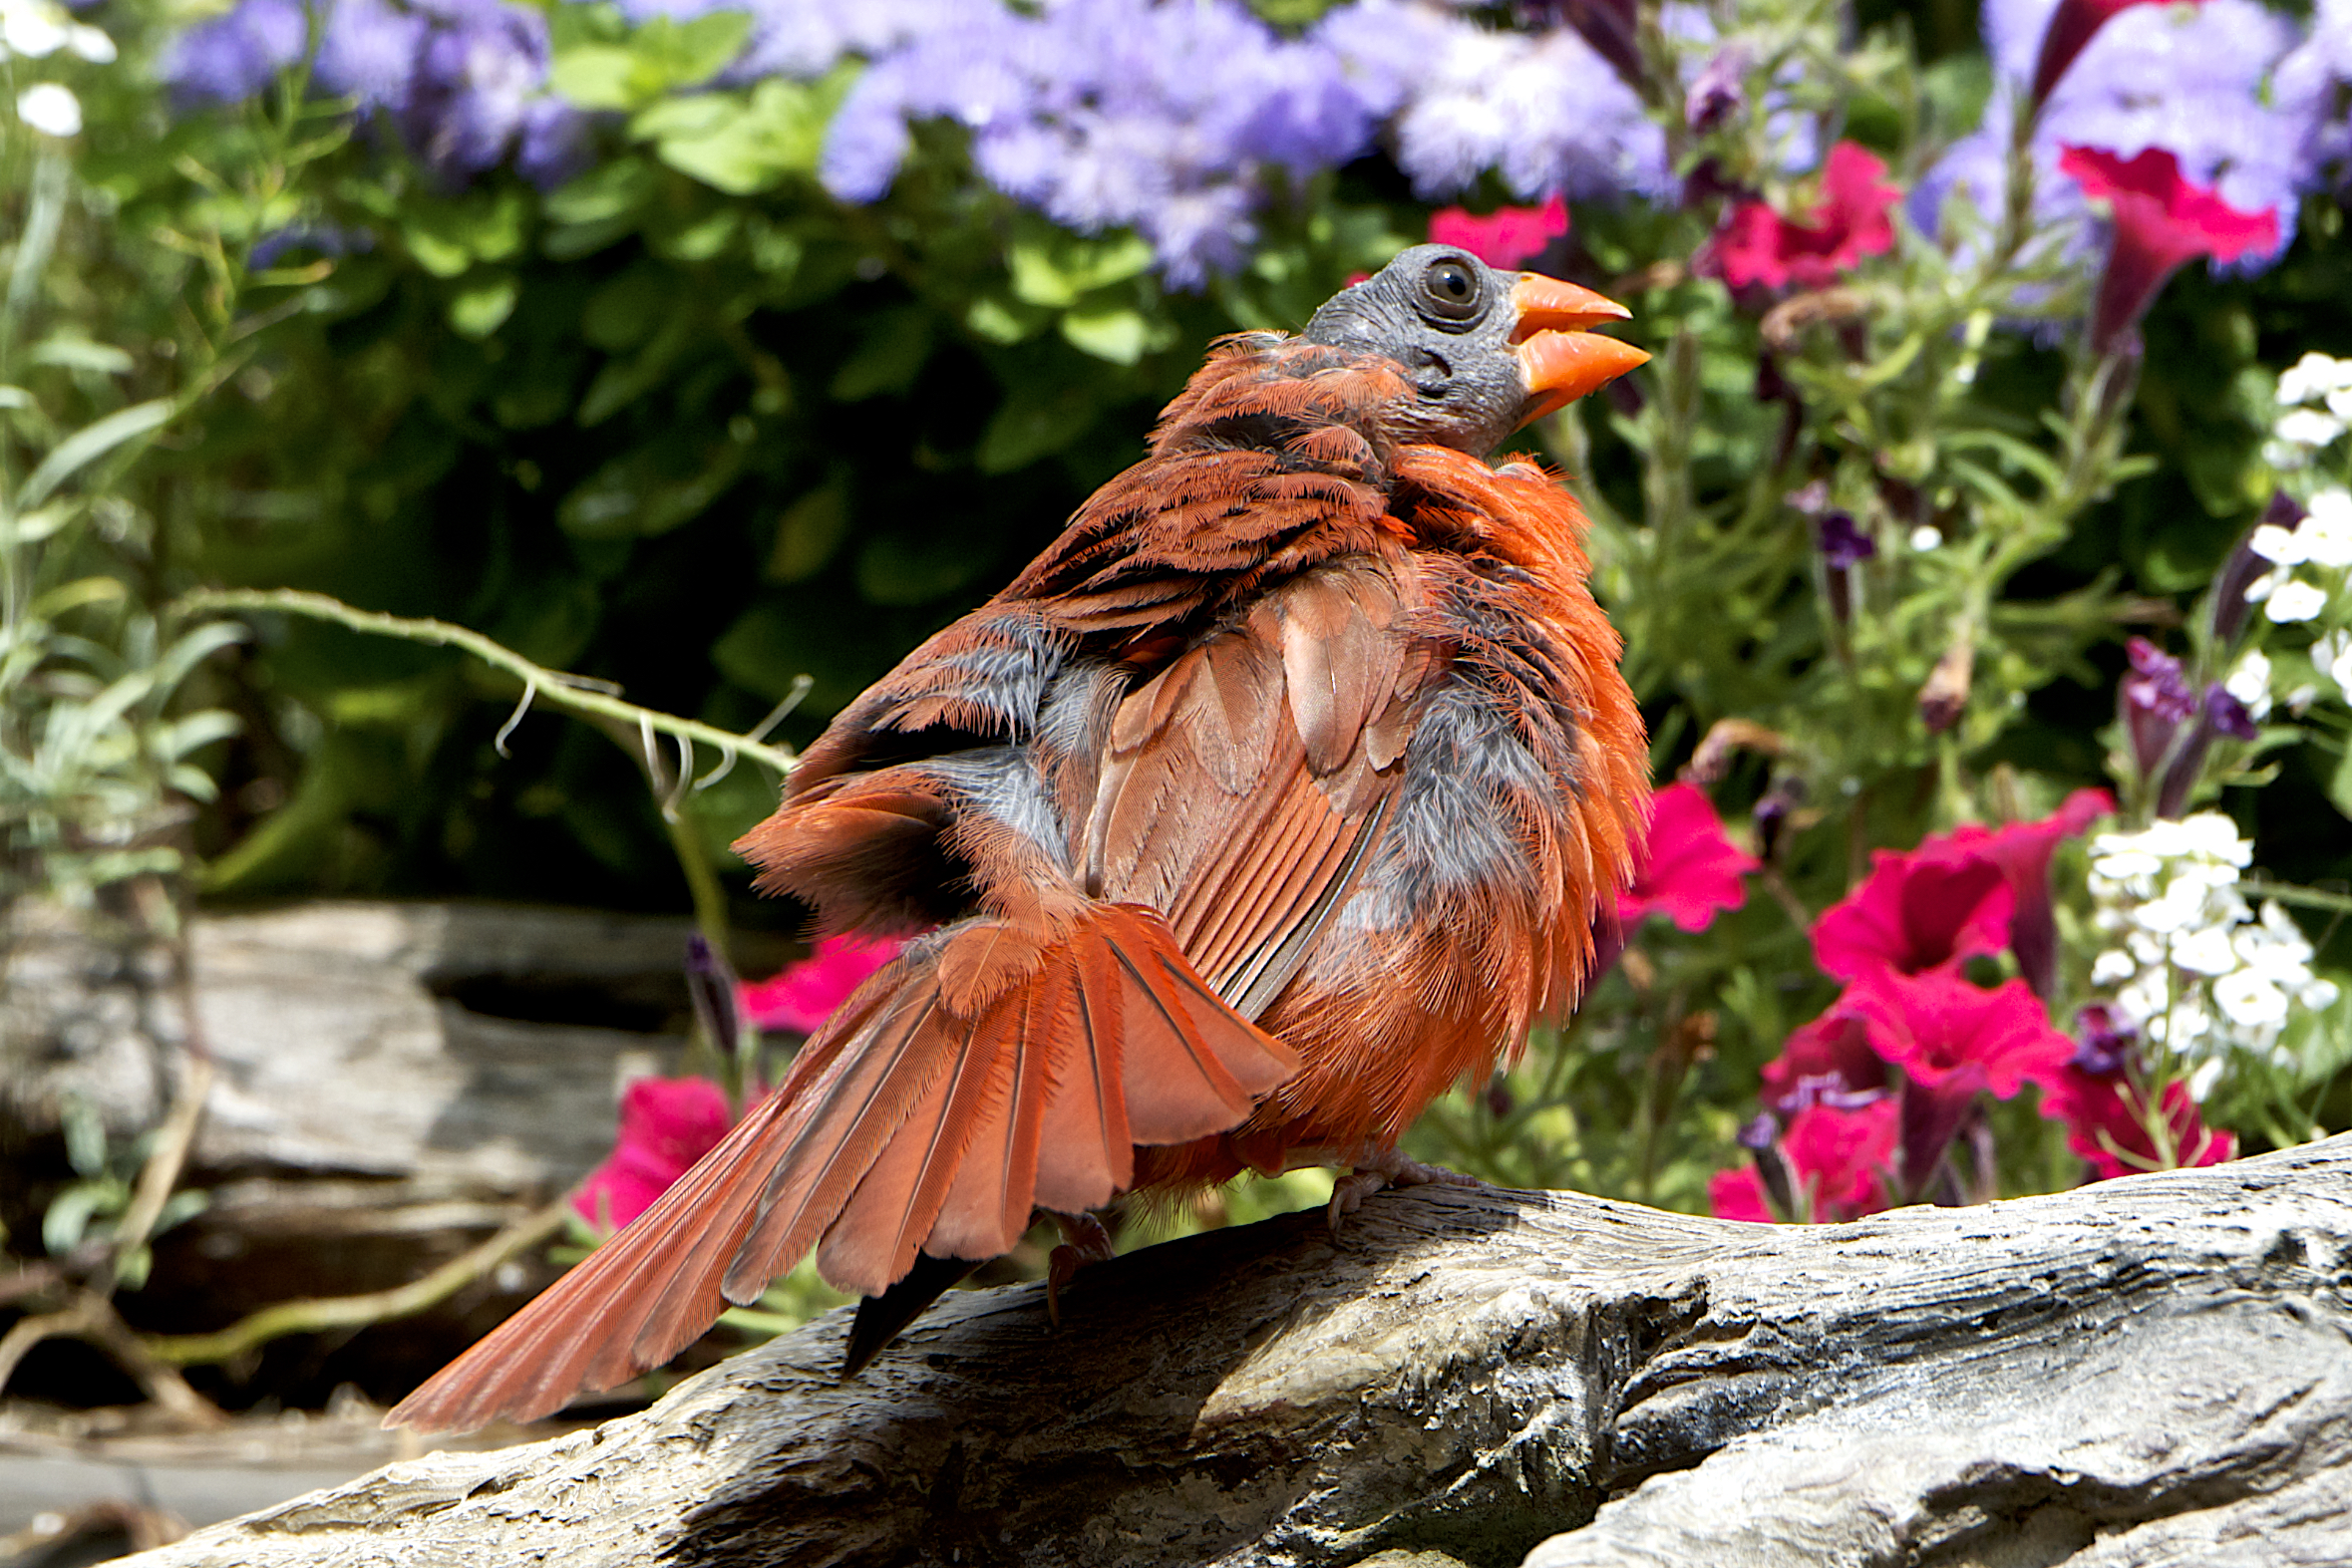 Northern Cardinal in molting process